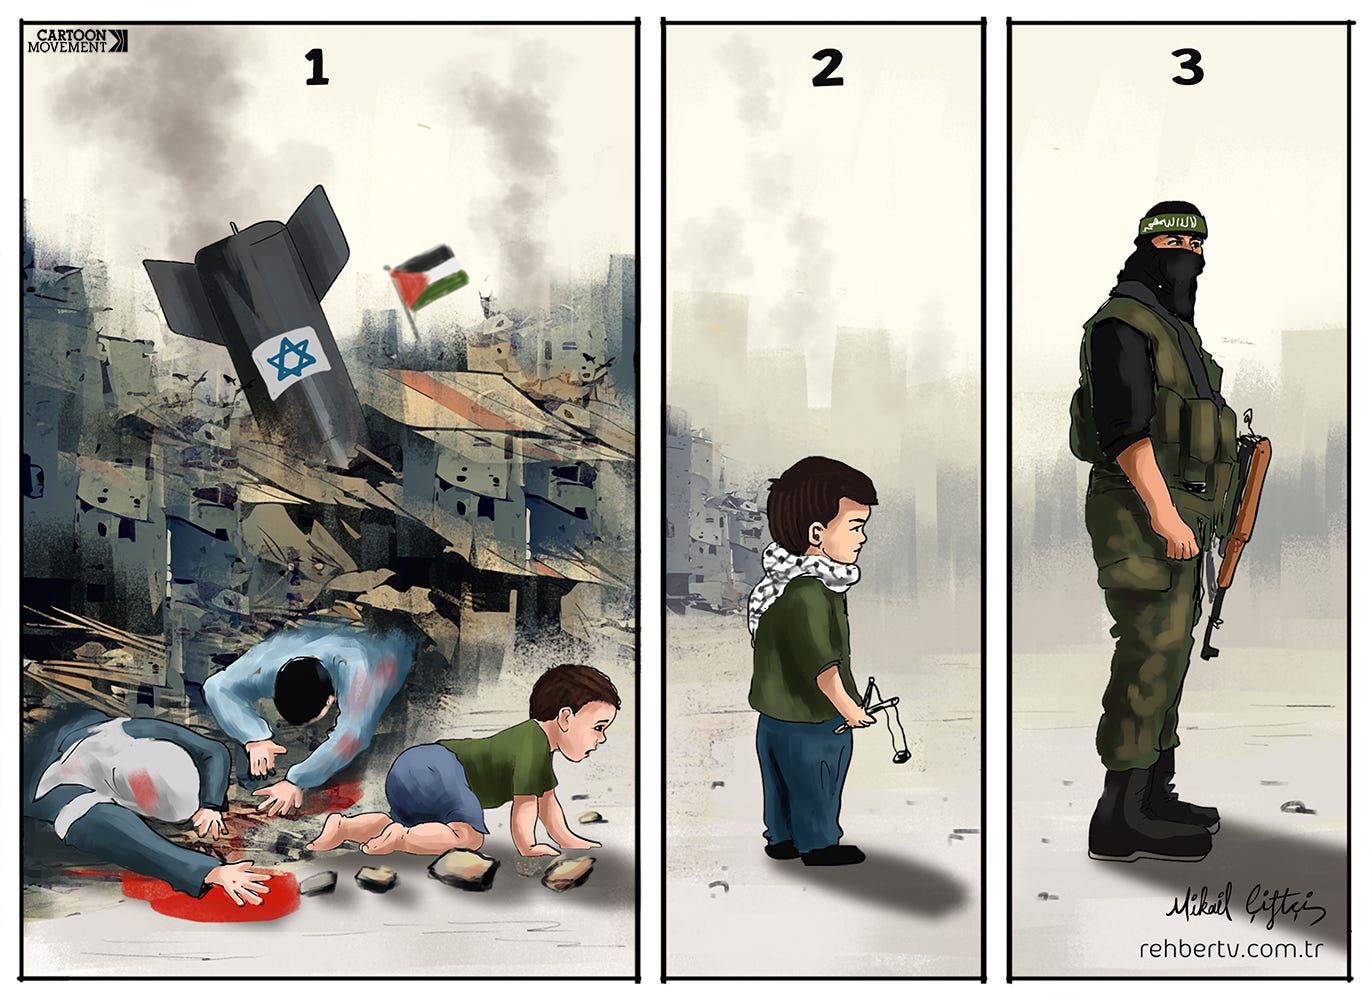 Three-panel cartoon showing a young child losing his parents to an Israeli missile in the first panel. In the second panel we see him growing up with a catapult in his hand, fighting Israel. In the third panel, he has become a fighter for Hamas.